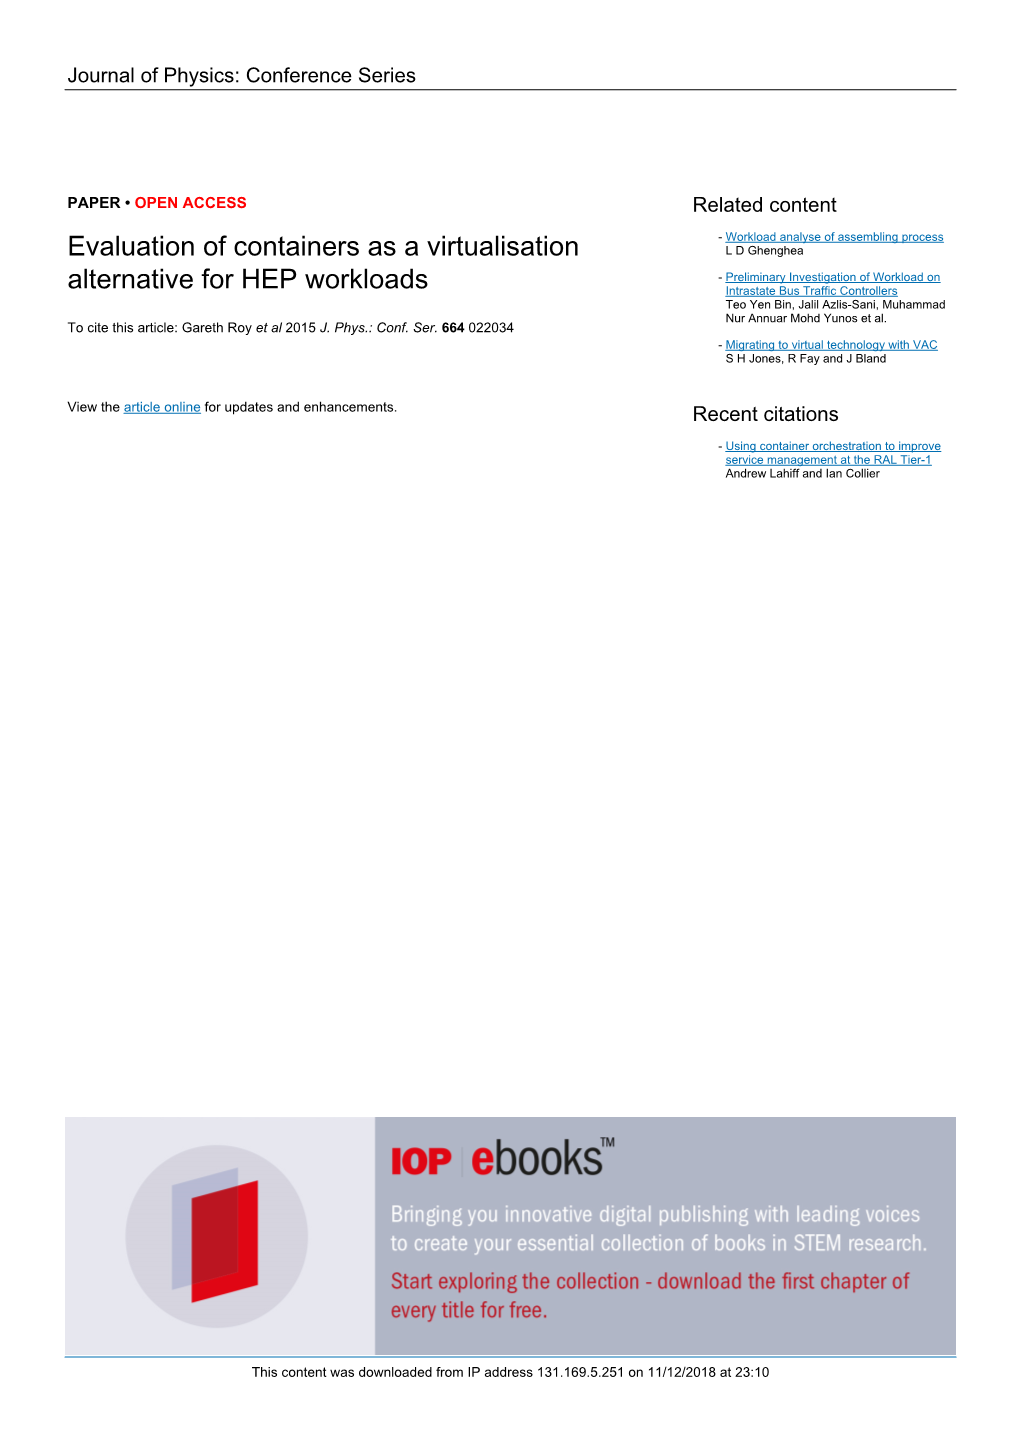 Evaluation of Containers As a Virtualisation Alternative for HEP Workloads